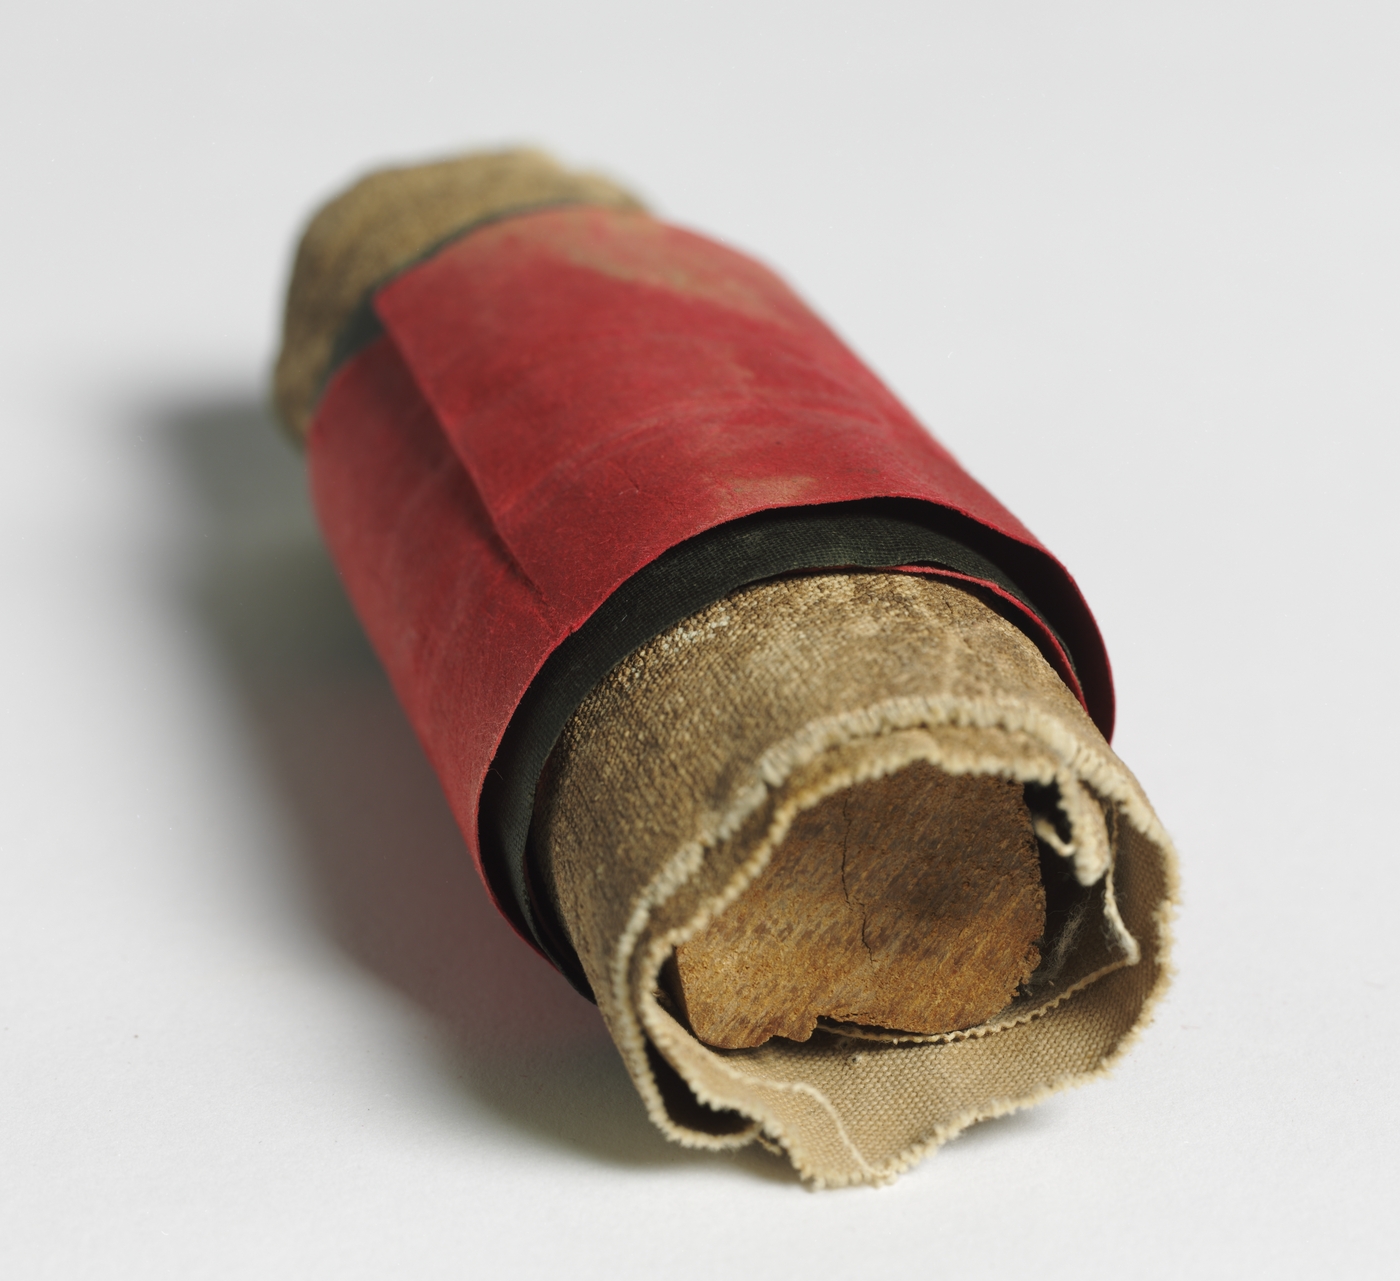 Strips of thick-looking fabric, wound around a cylindrical piece of wood.